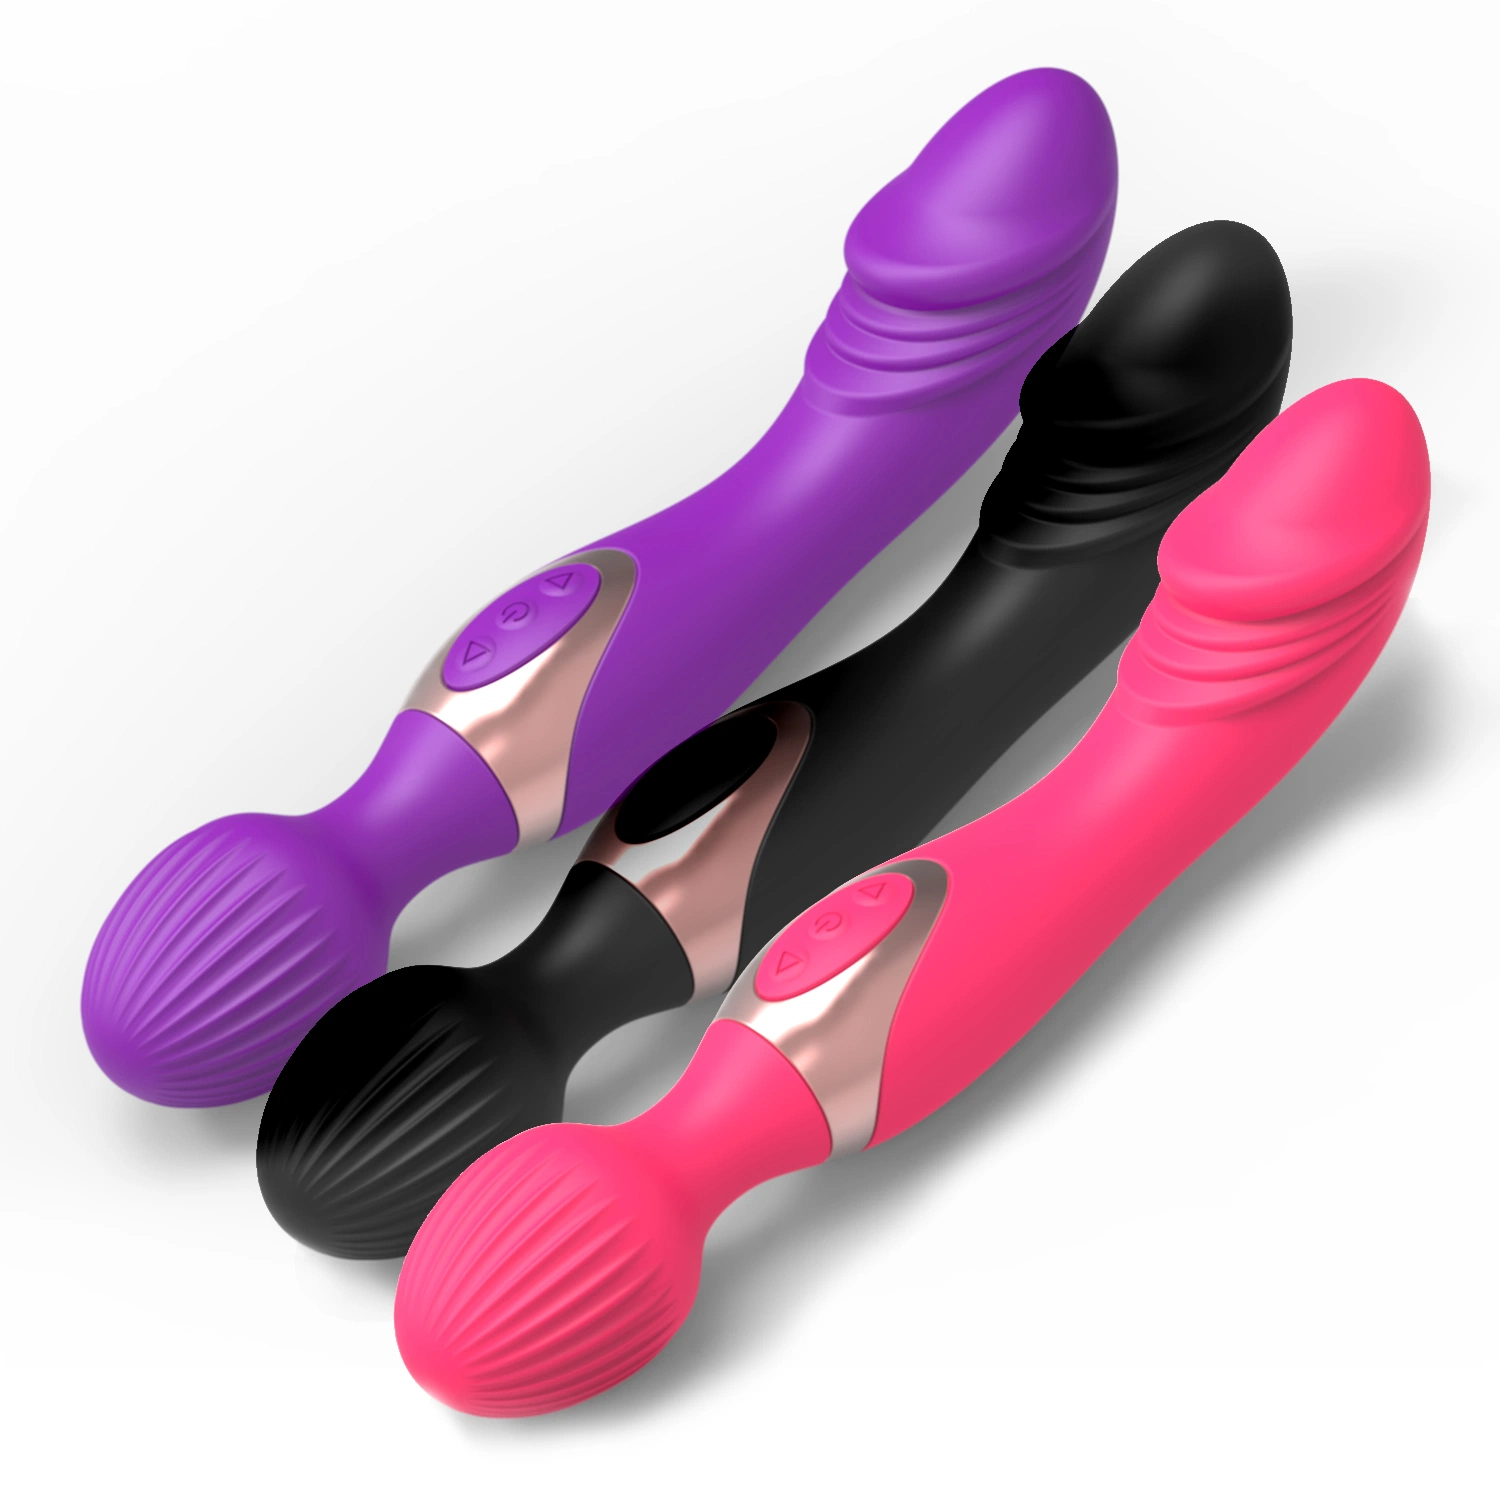 Factory Adult Toys Silicone Vibrating Massager Adult Product Women Sex Toy